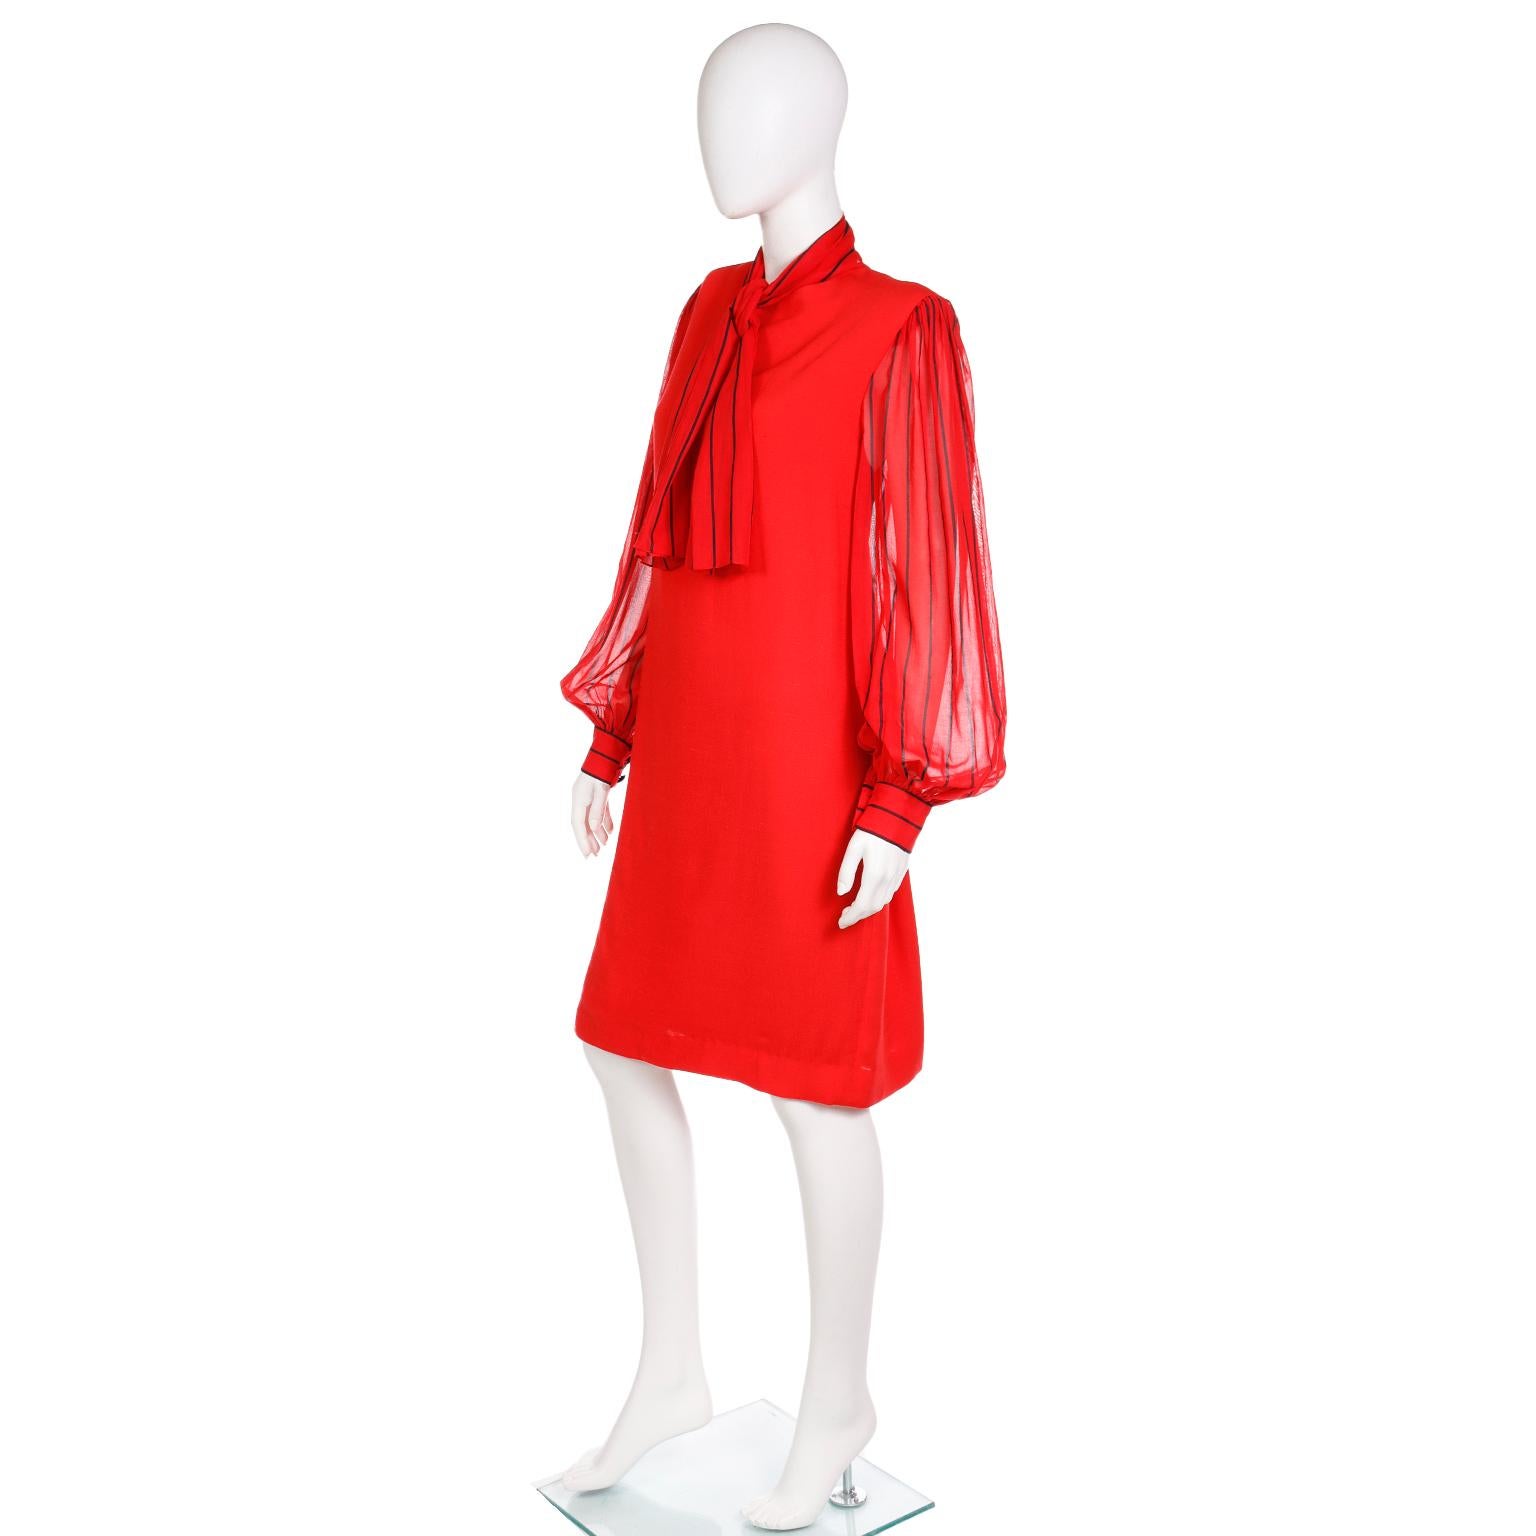 Pauline Trigere Vintage Red Dress With Sheer Striped Sleeves & Scarf For Sale 2